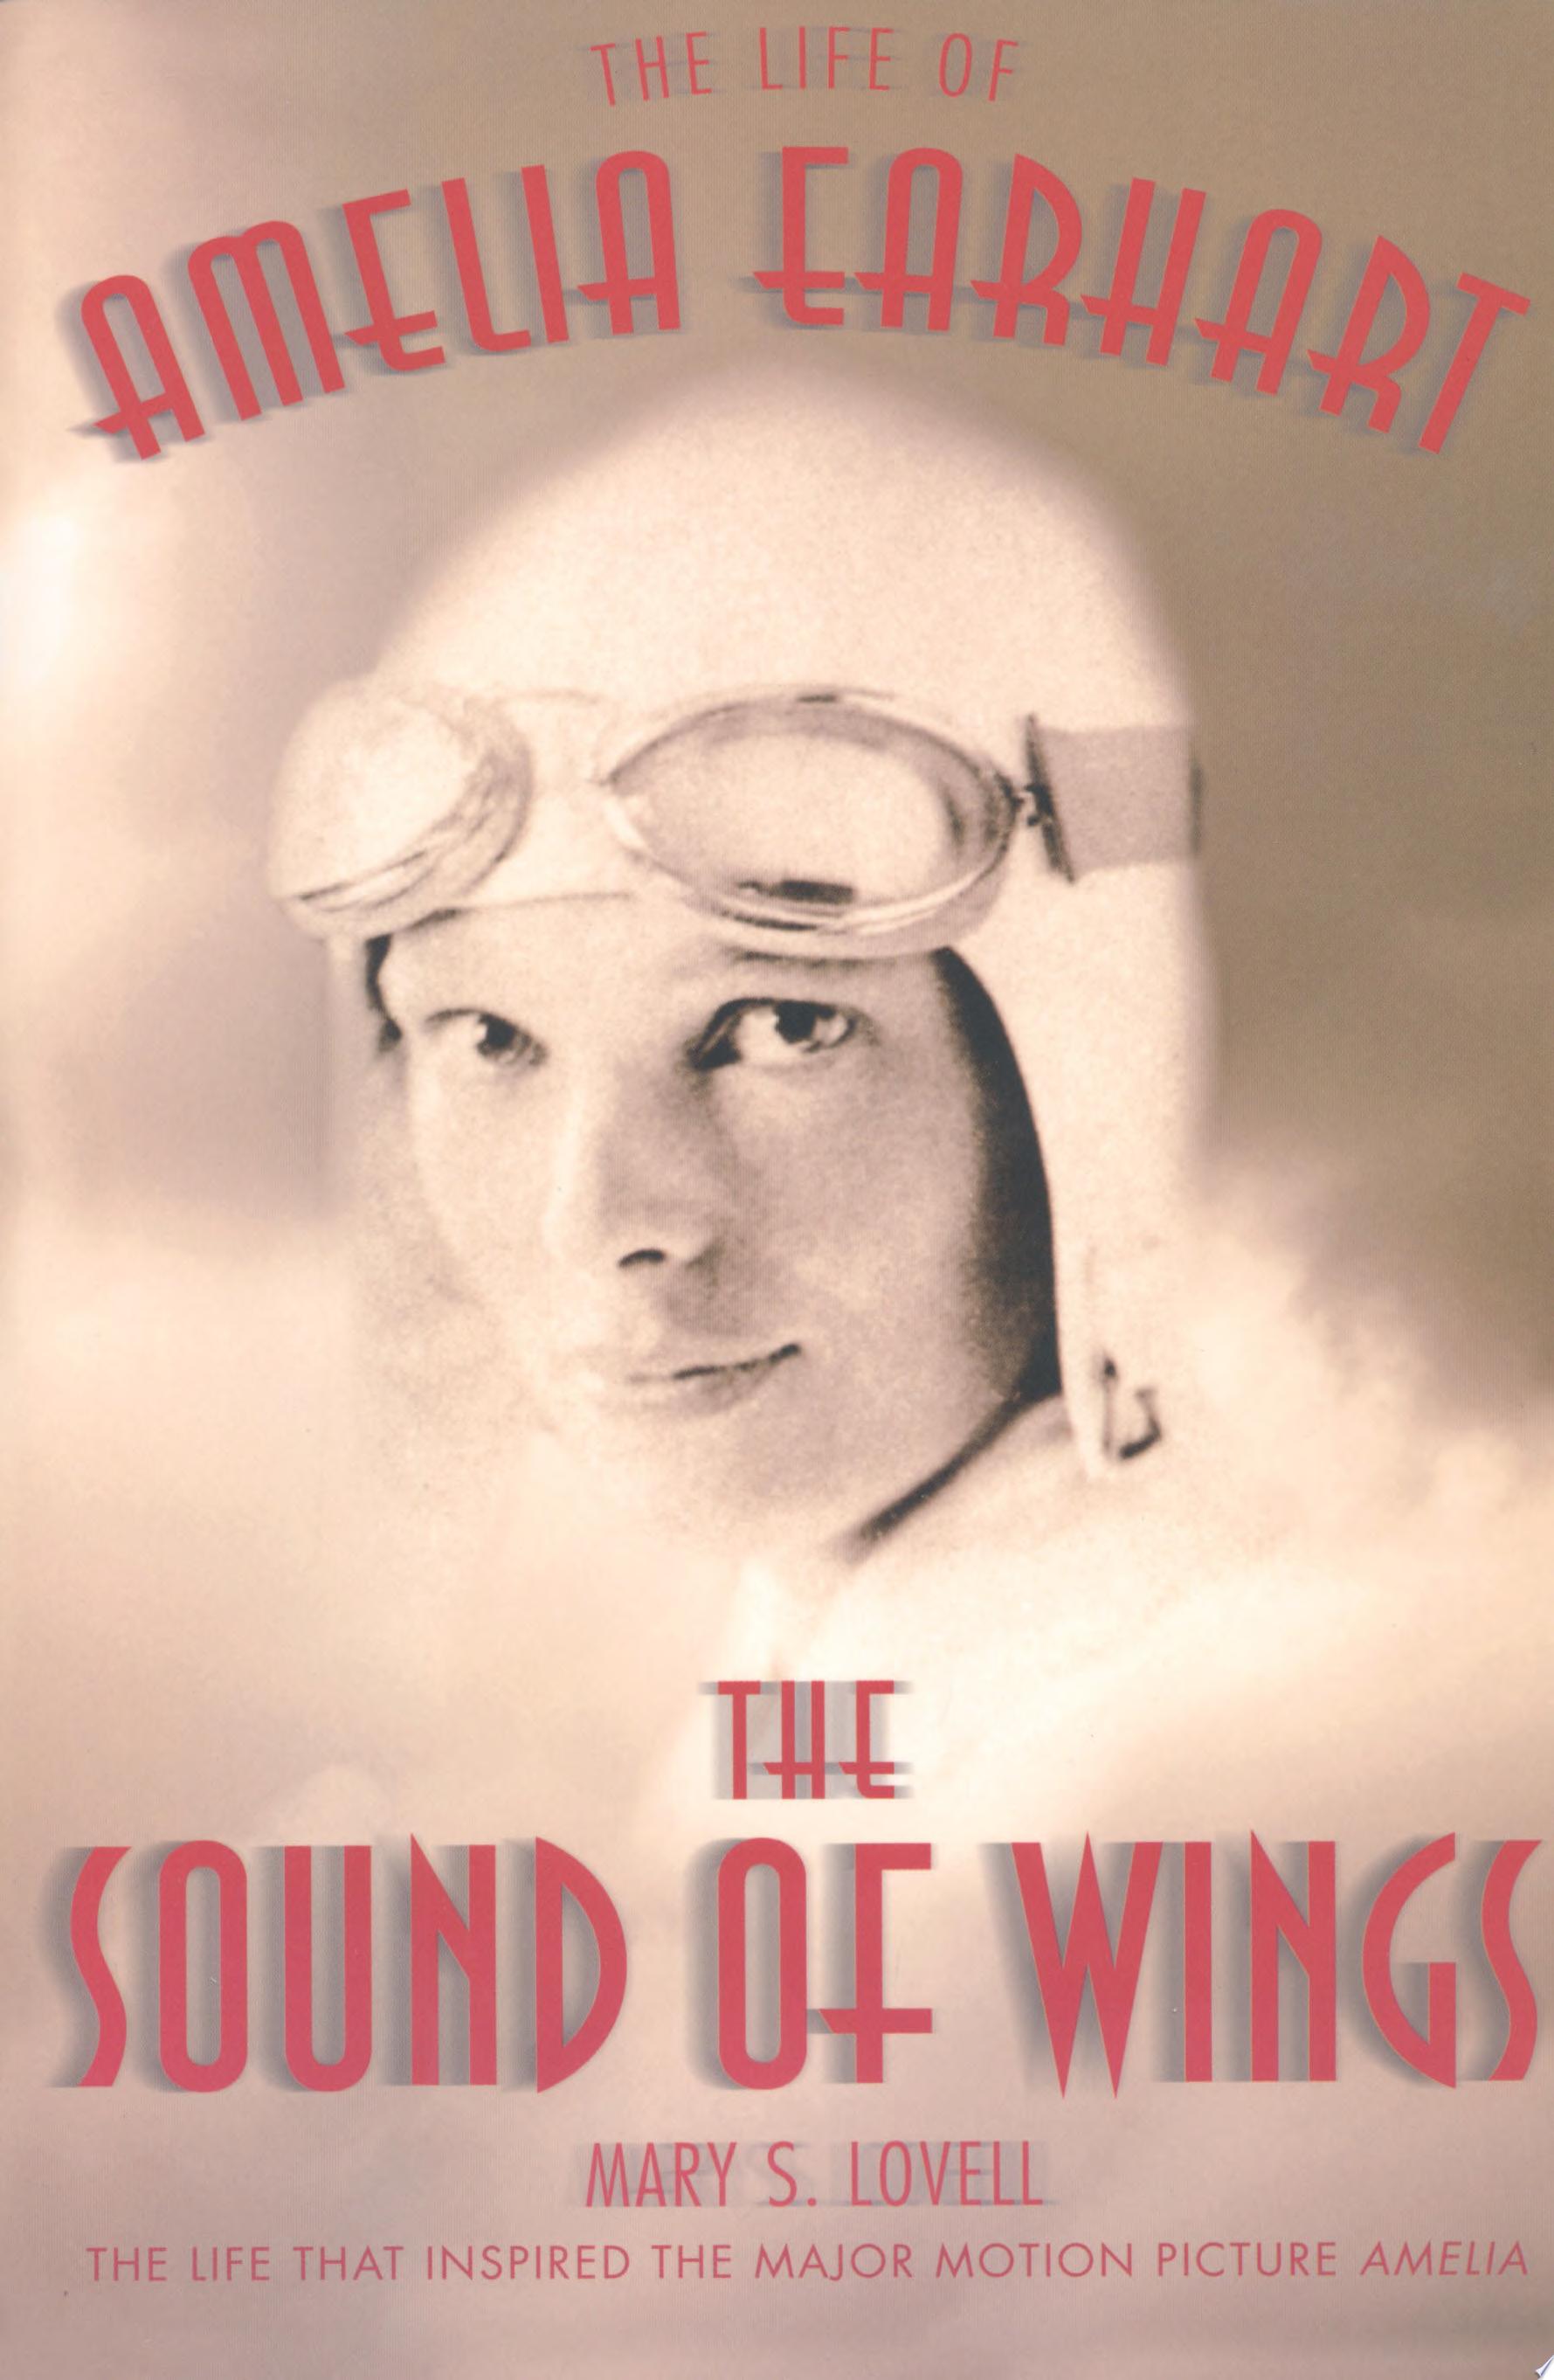 Image for "The Sound of Wings"